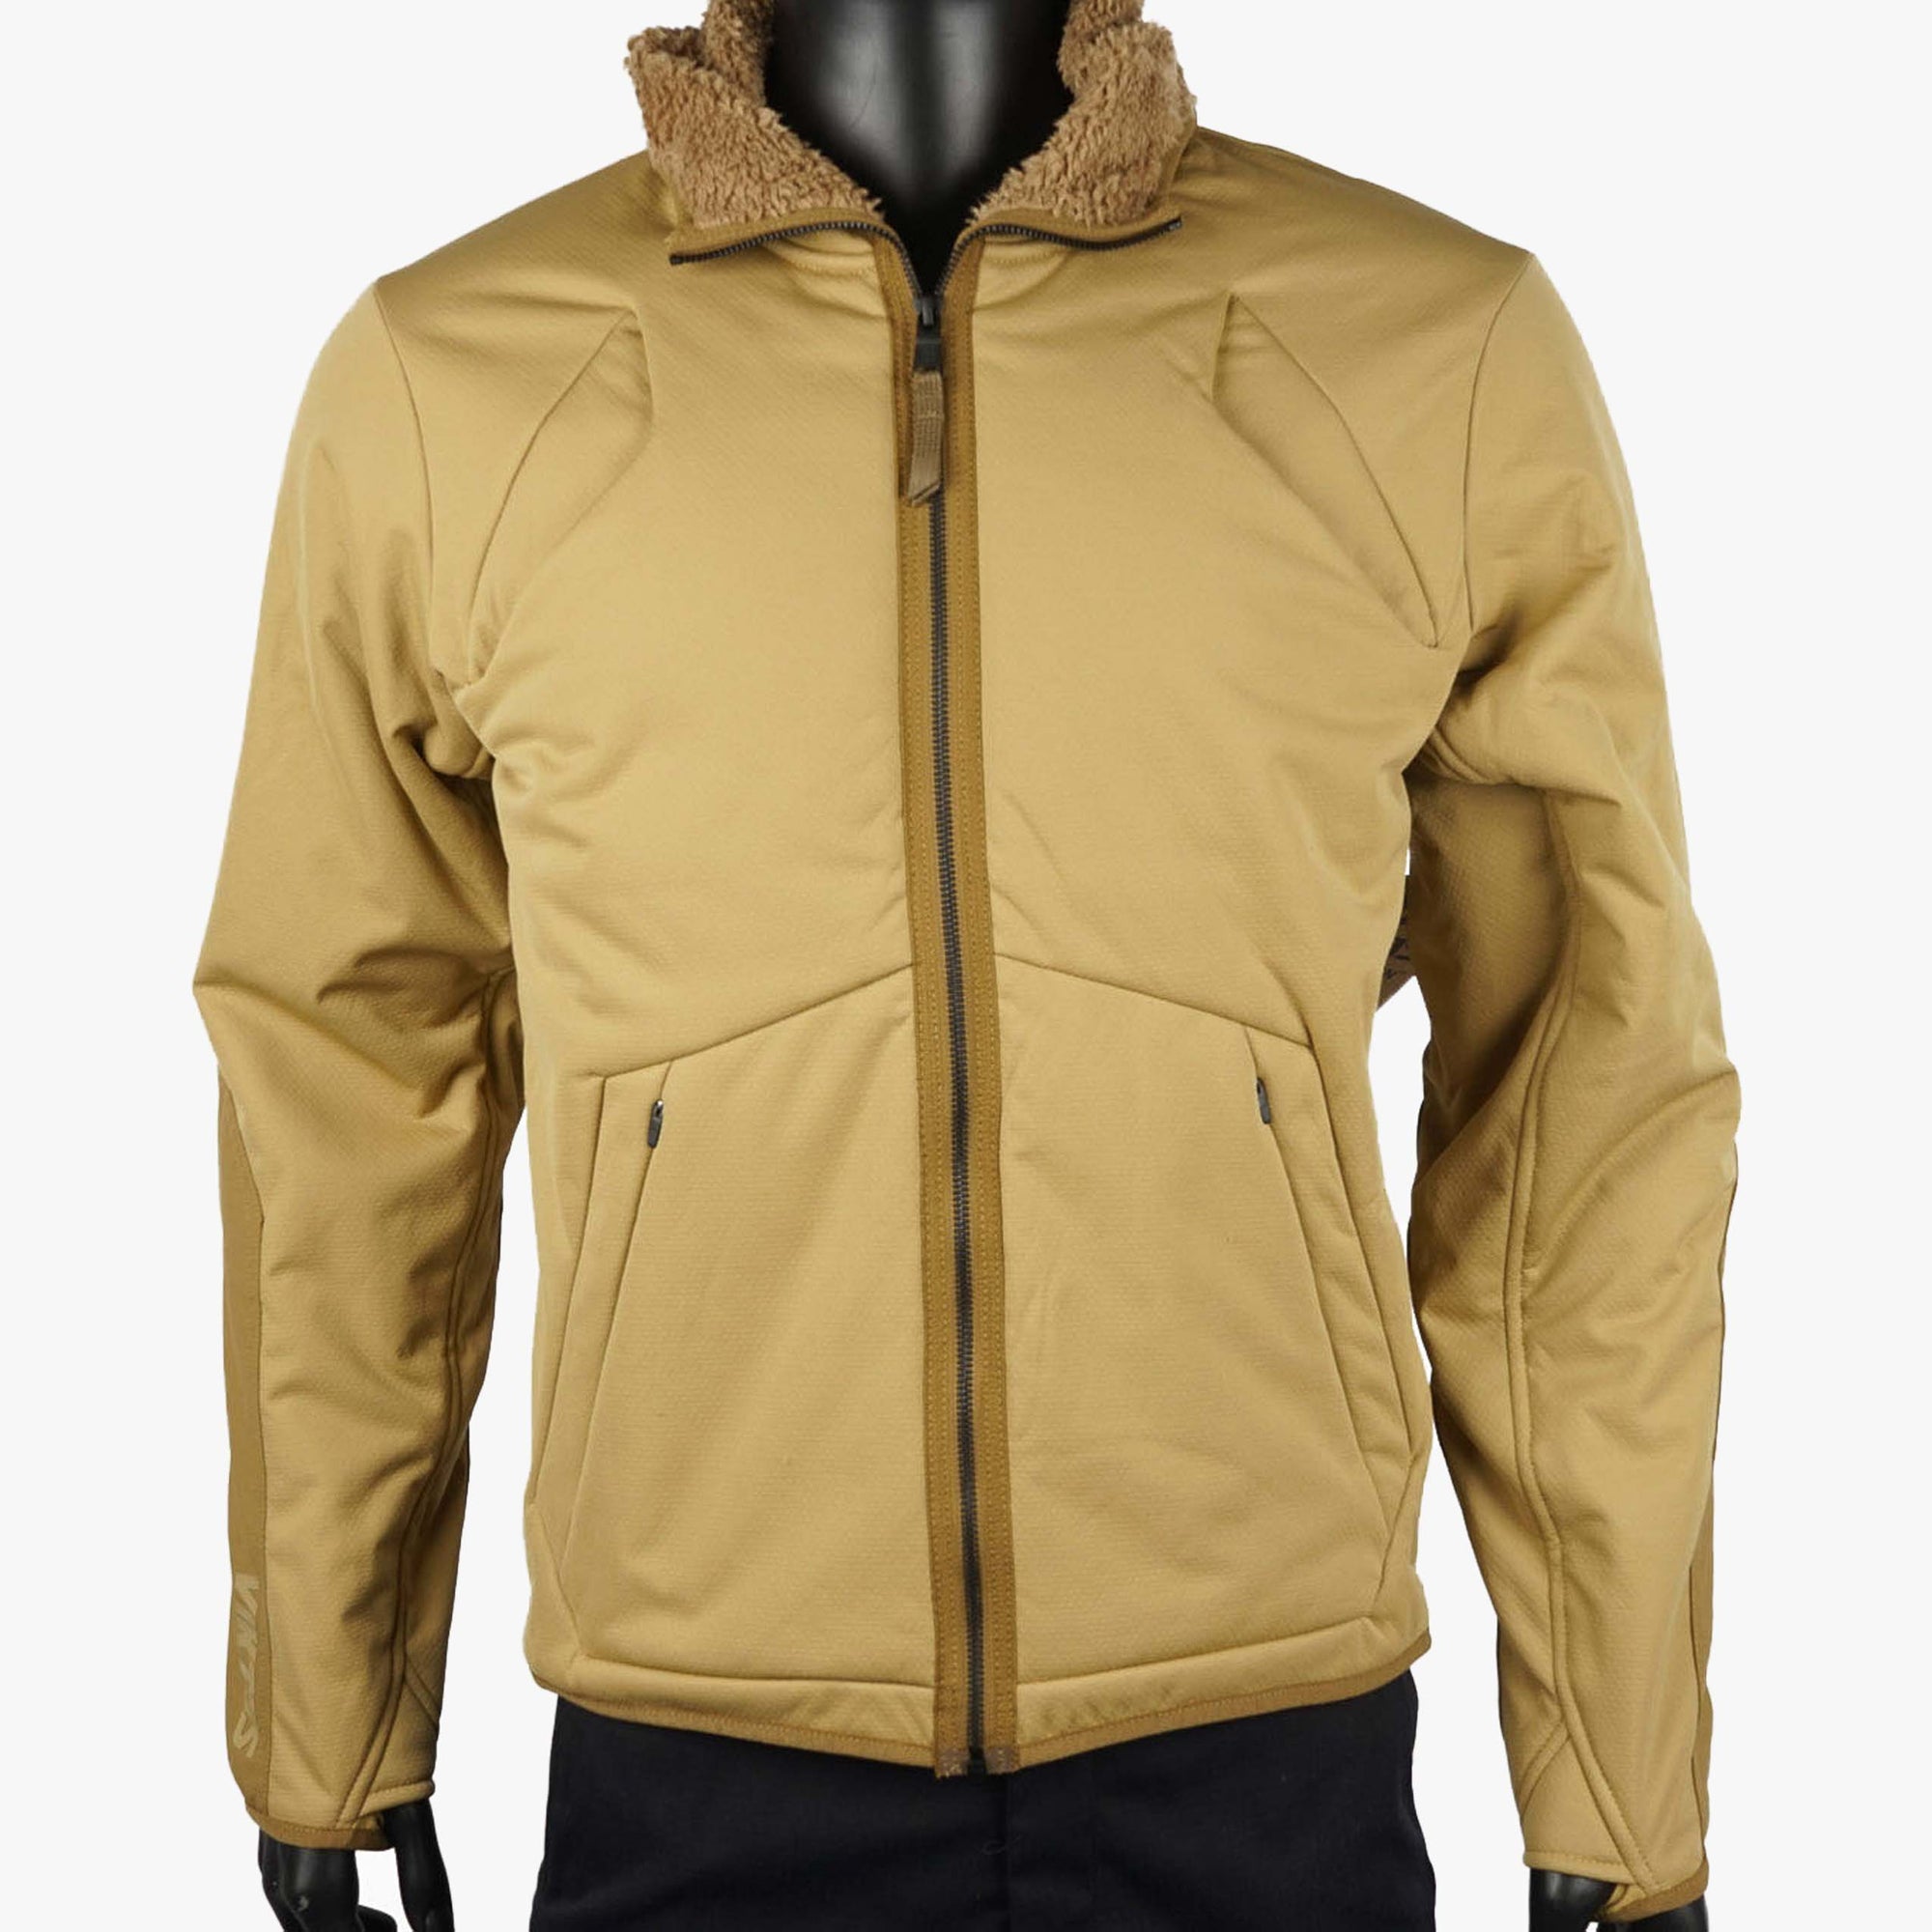 An insanely comfortable jacket for the range or everyday wear. The Viktos Bersherken Jacket is waterproof and a perfect jacket for cold rainy weather. 